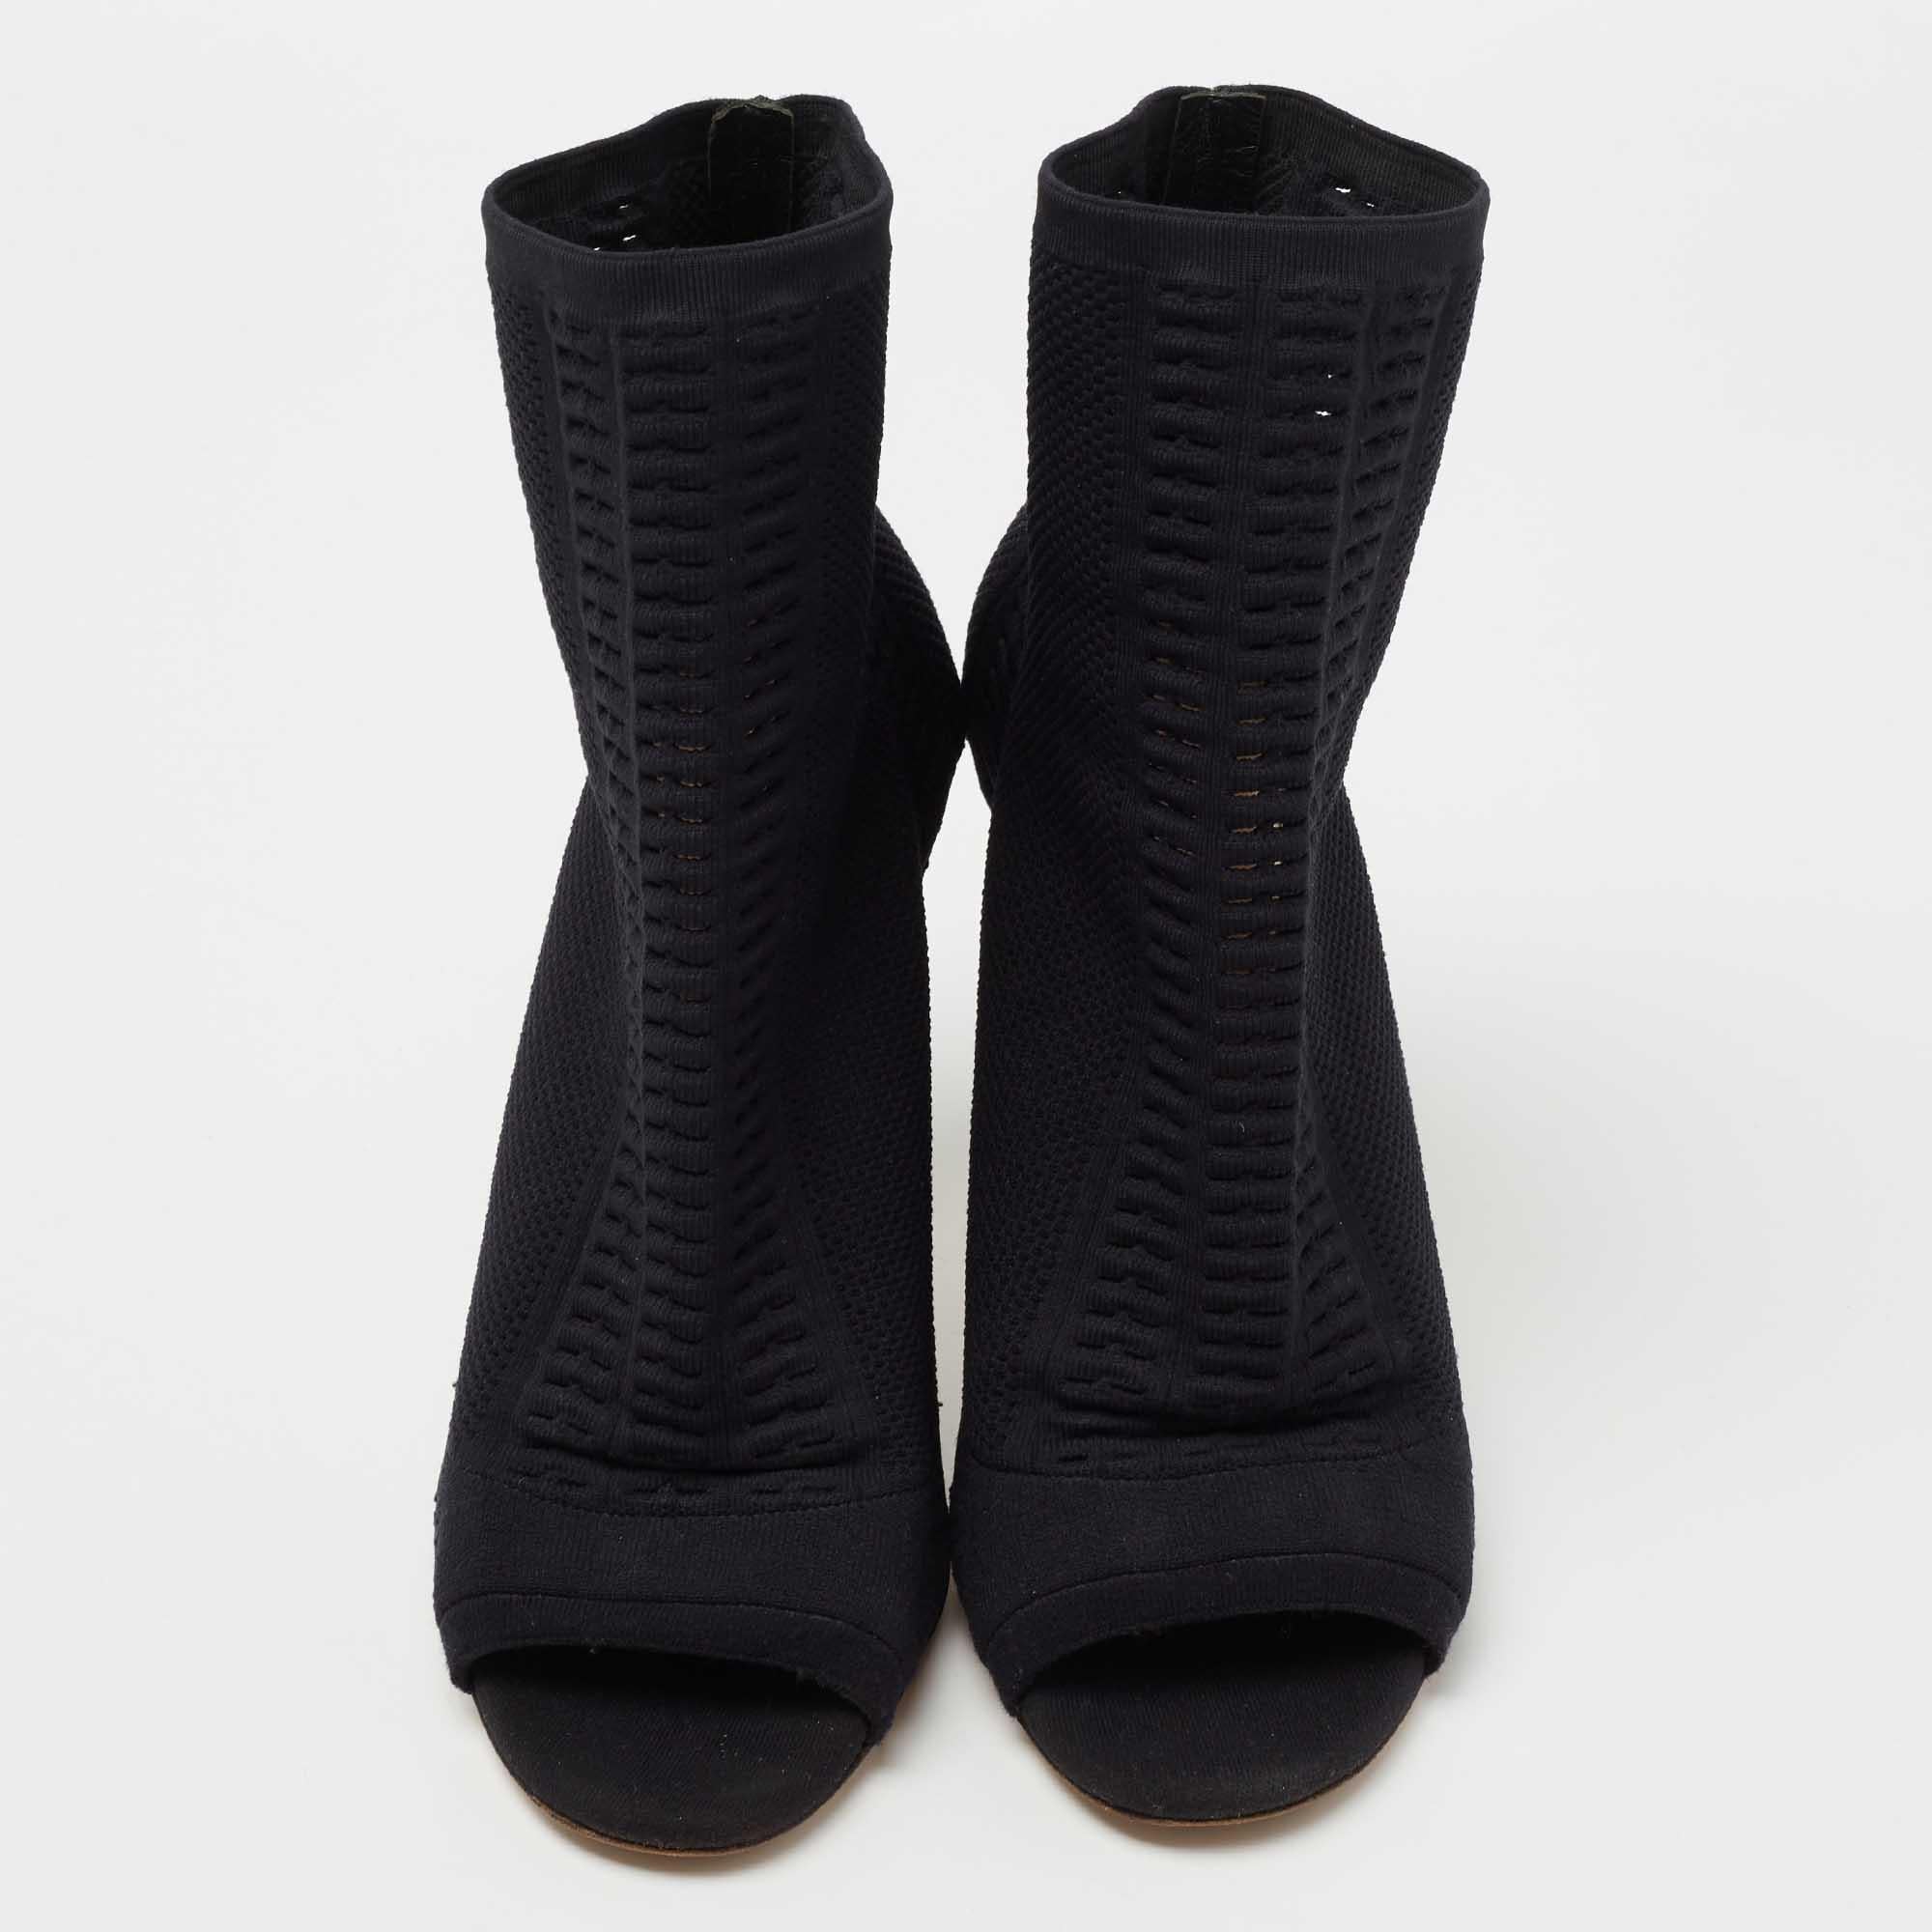 Add the Gianvito Rossi charm to your shoe collection with this pair of chic booties. Crafted using knit fabric, the black booties feature open toes and a comfortable, sock-like fit. They are lifted on 11 cm heels.

